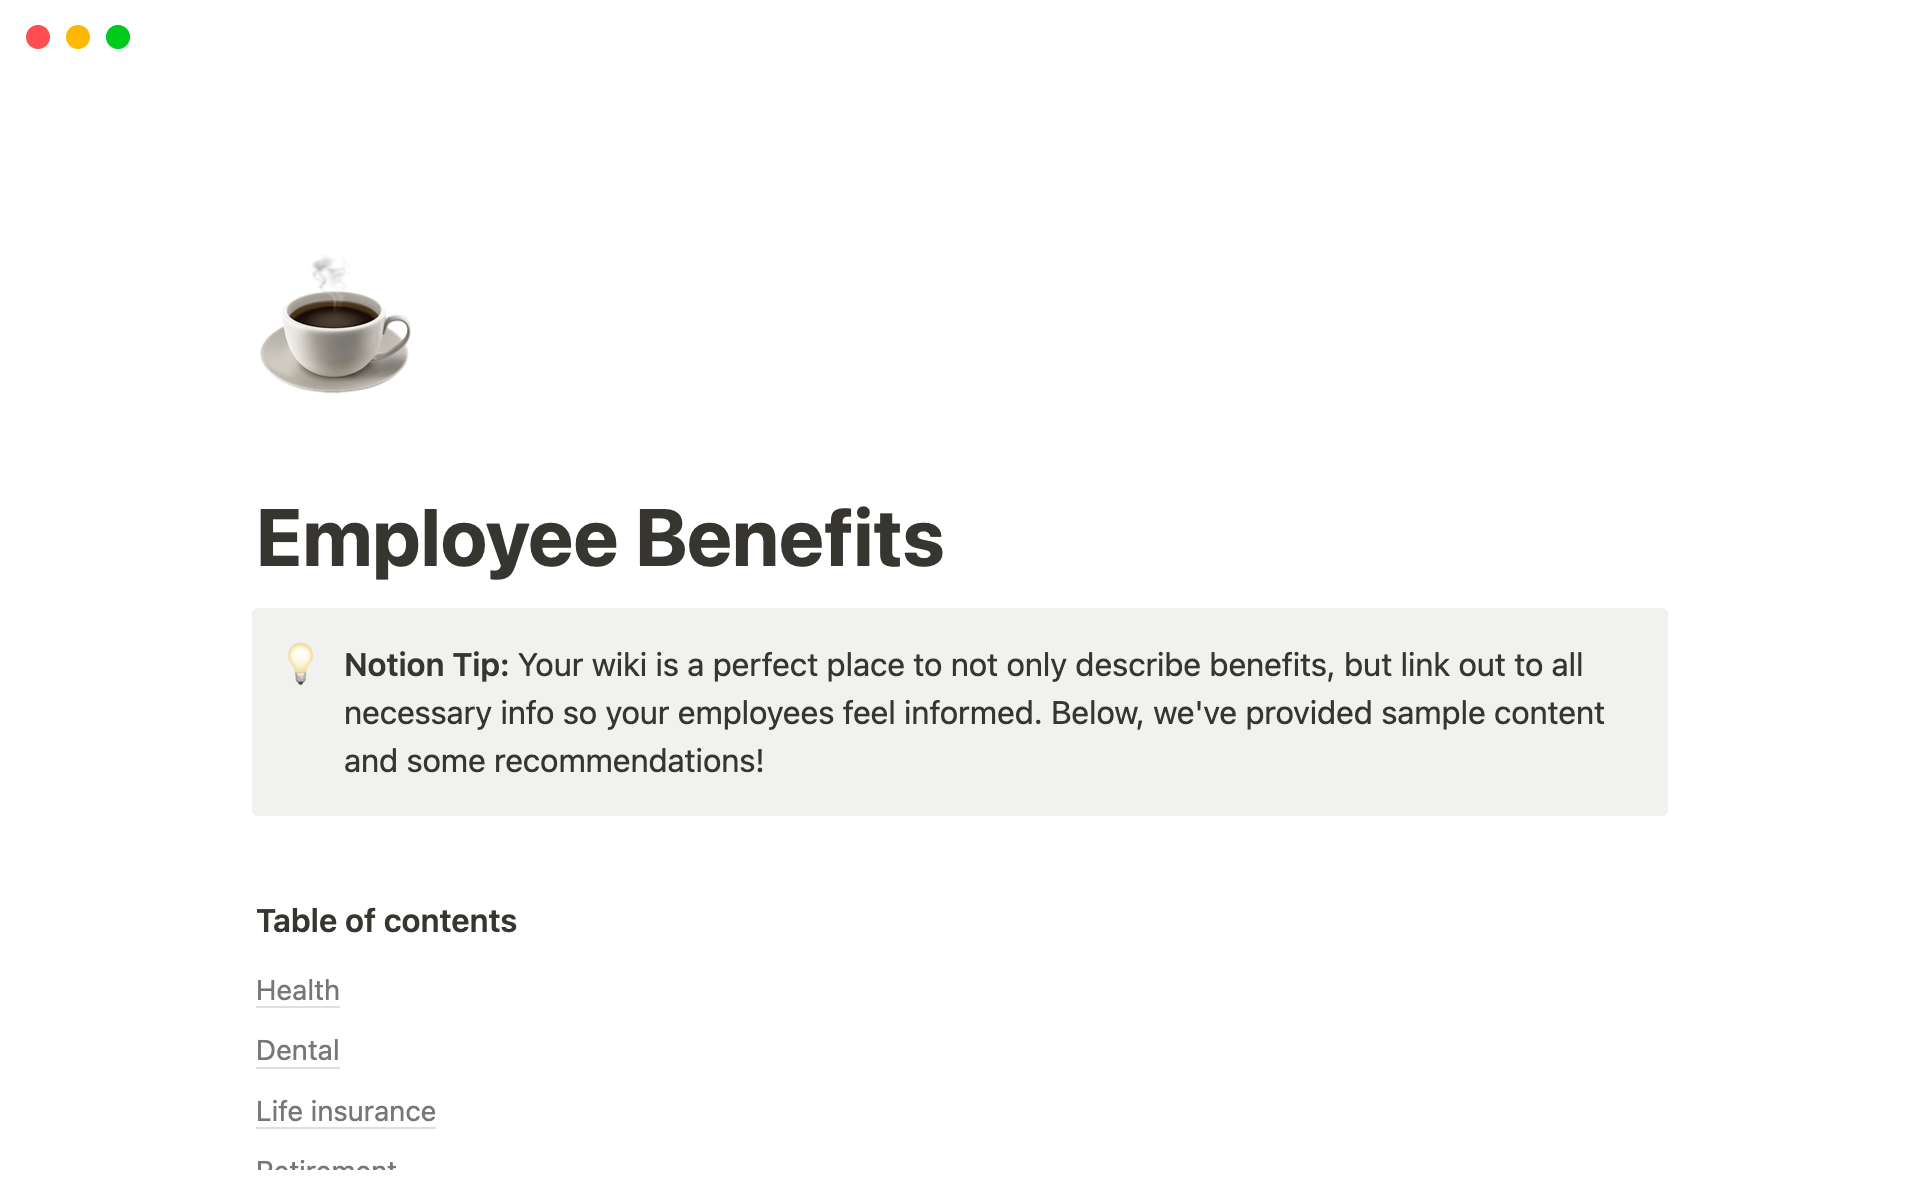 This template is a perfect place to describe your company’s benefits and link out to all necessary info so your employees feel appreciated and informed.